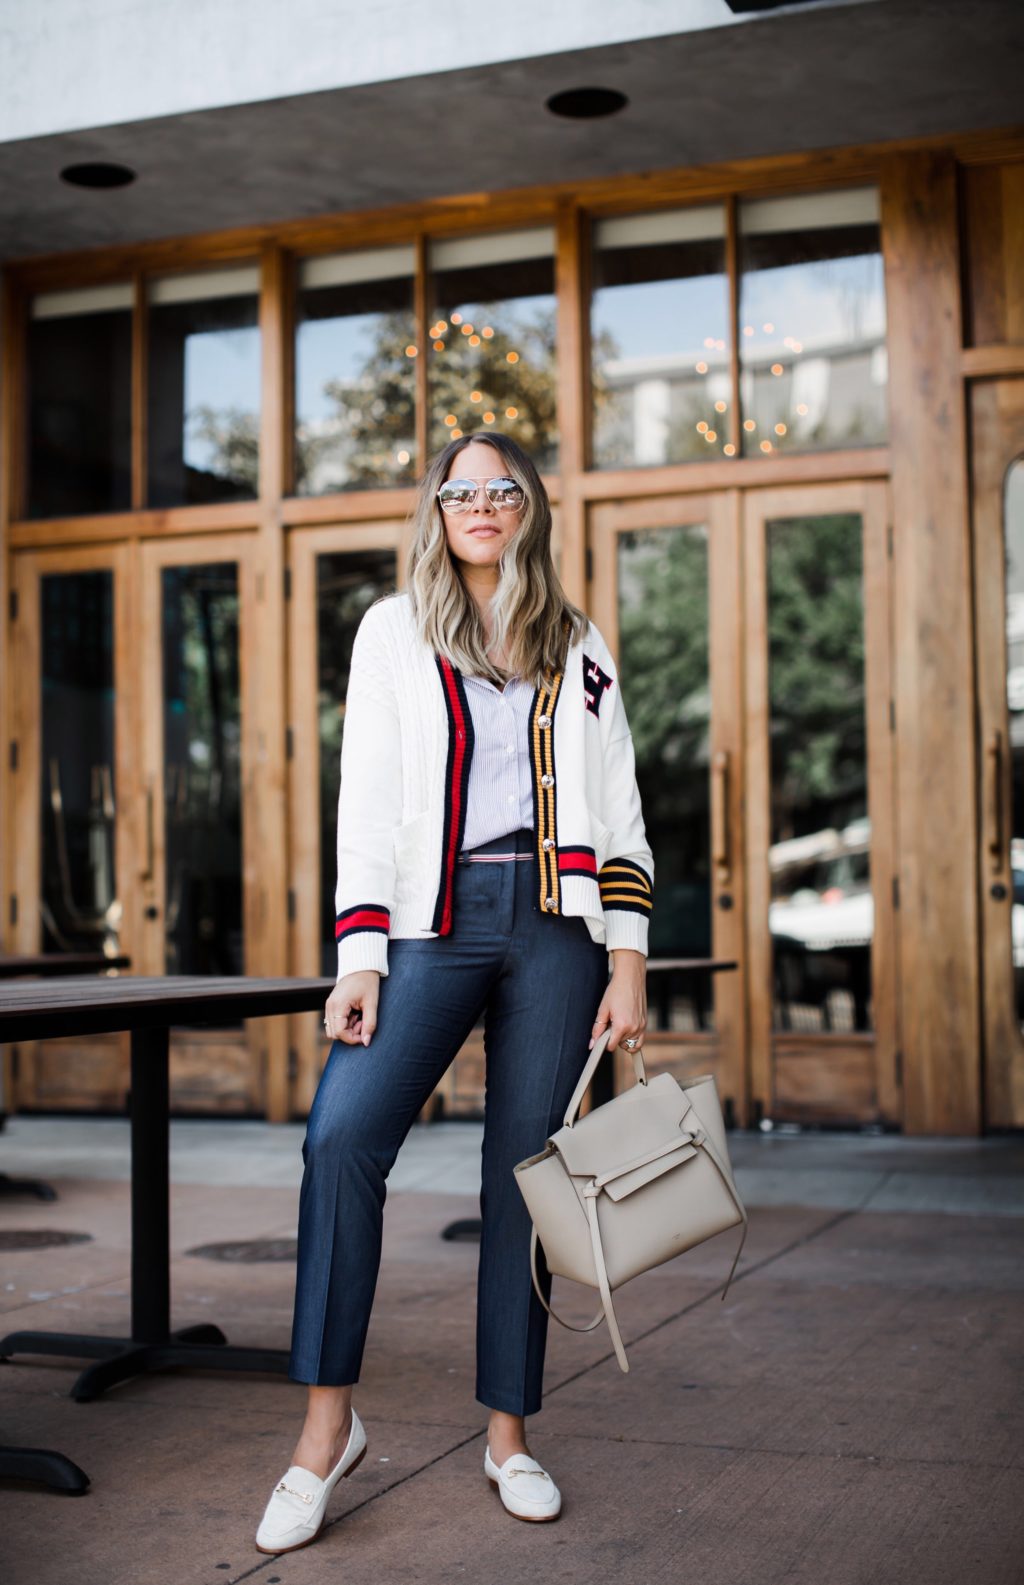 New Tommy Hilfiger Collection Feels Perfect for | The Teacher a Dallas Fashion Blog featuring Beauty & Lifestyle